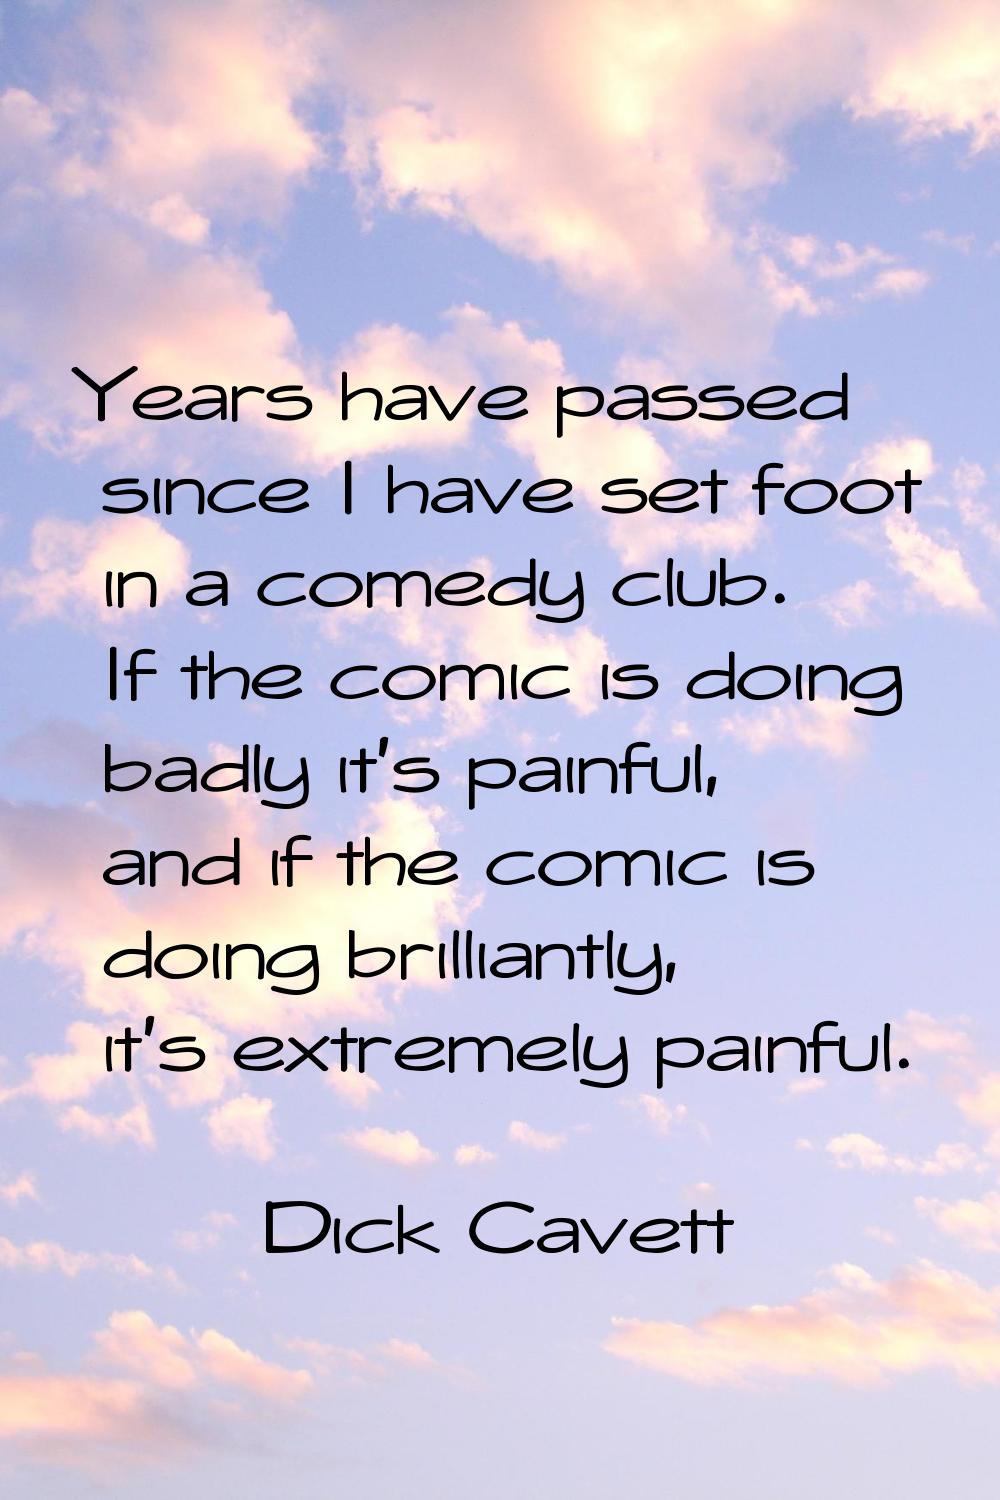 Years have passed since I have set foot in a comedy club. If the comic is doing badly it's painful,